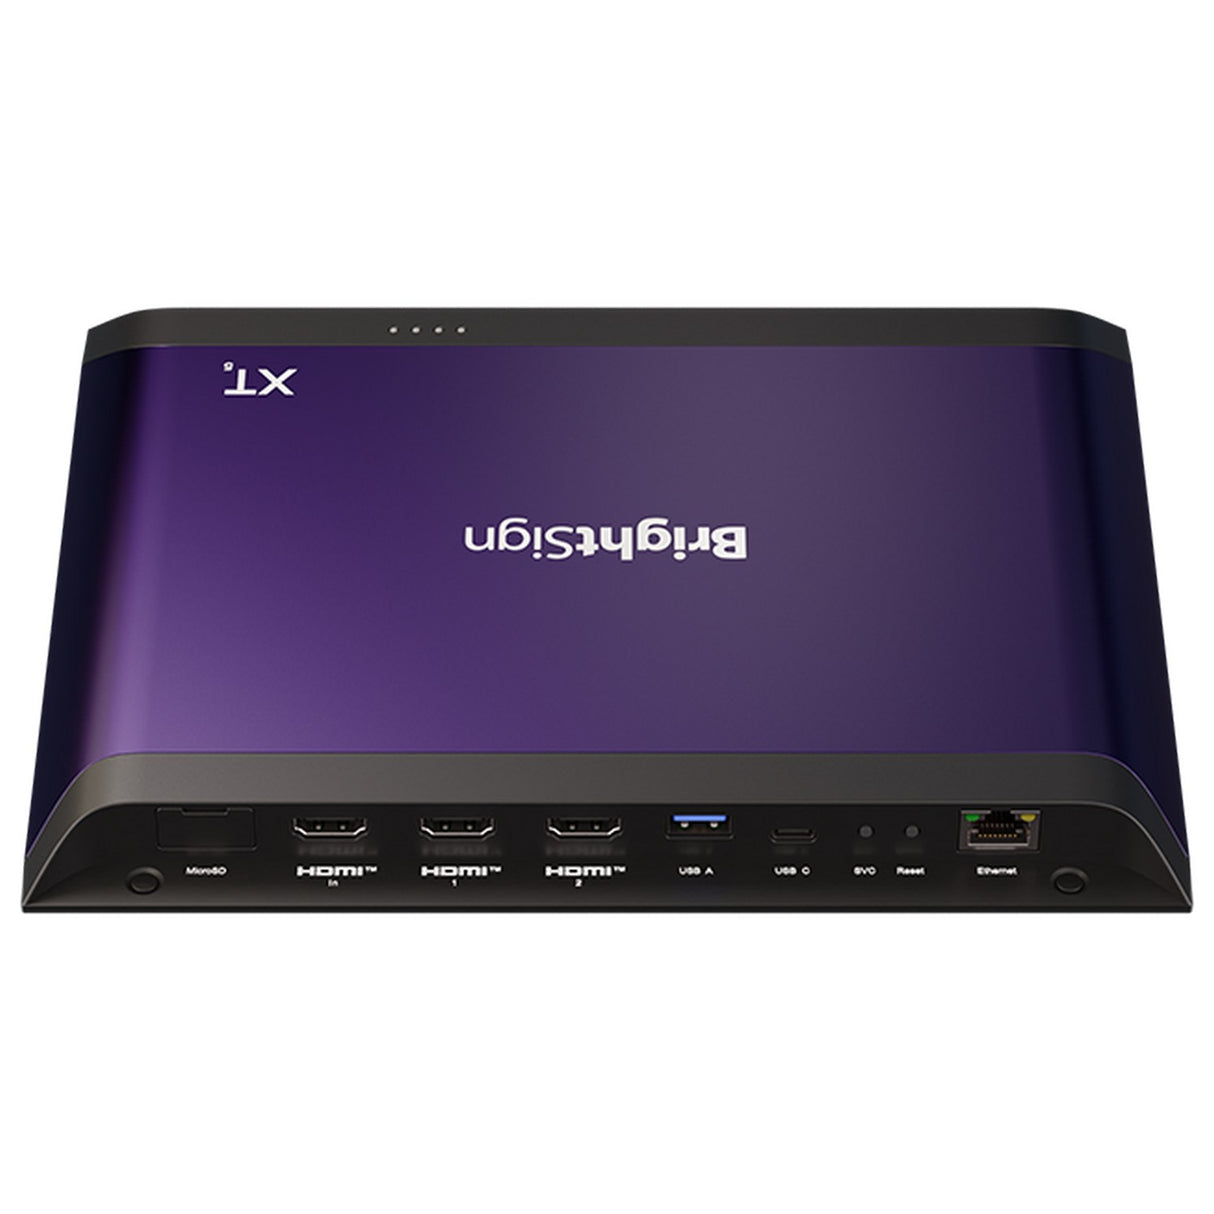 BrightSign XT1145 8K60p Digital Signage Player with Expanded I/O Package